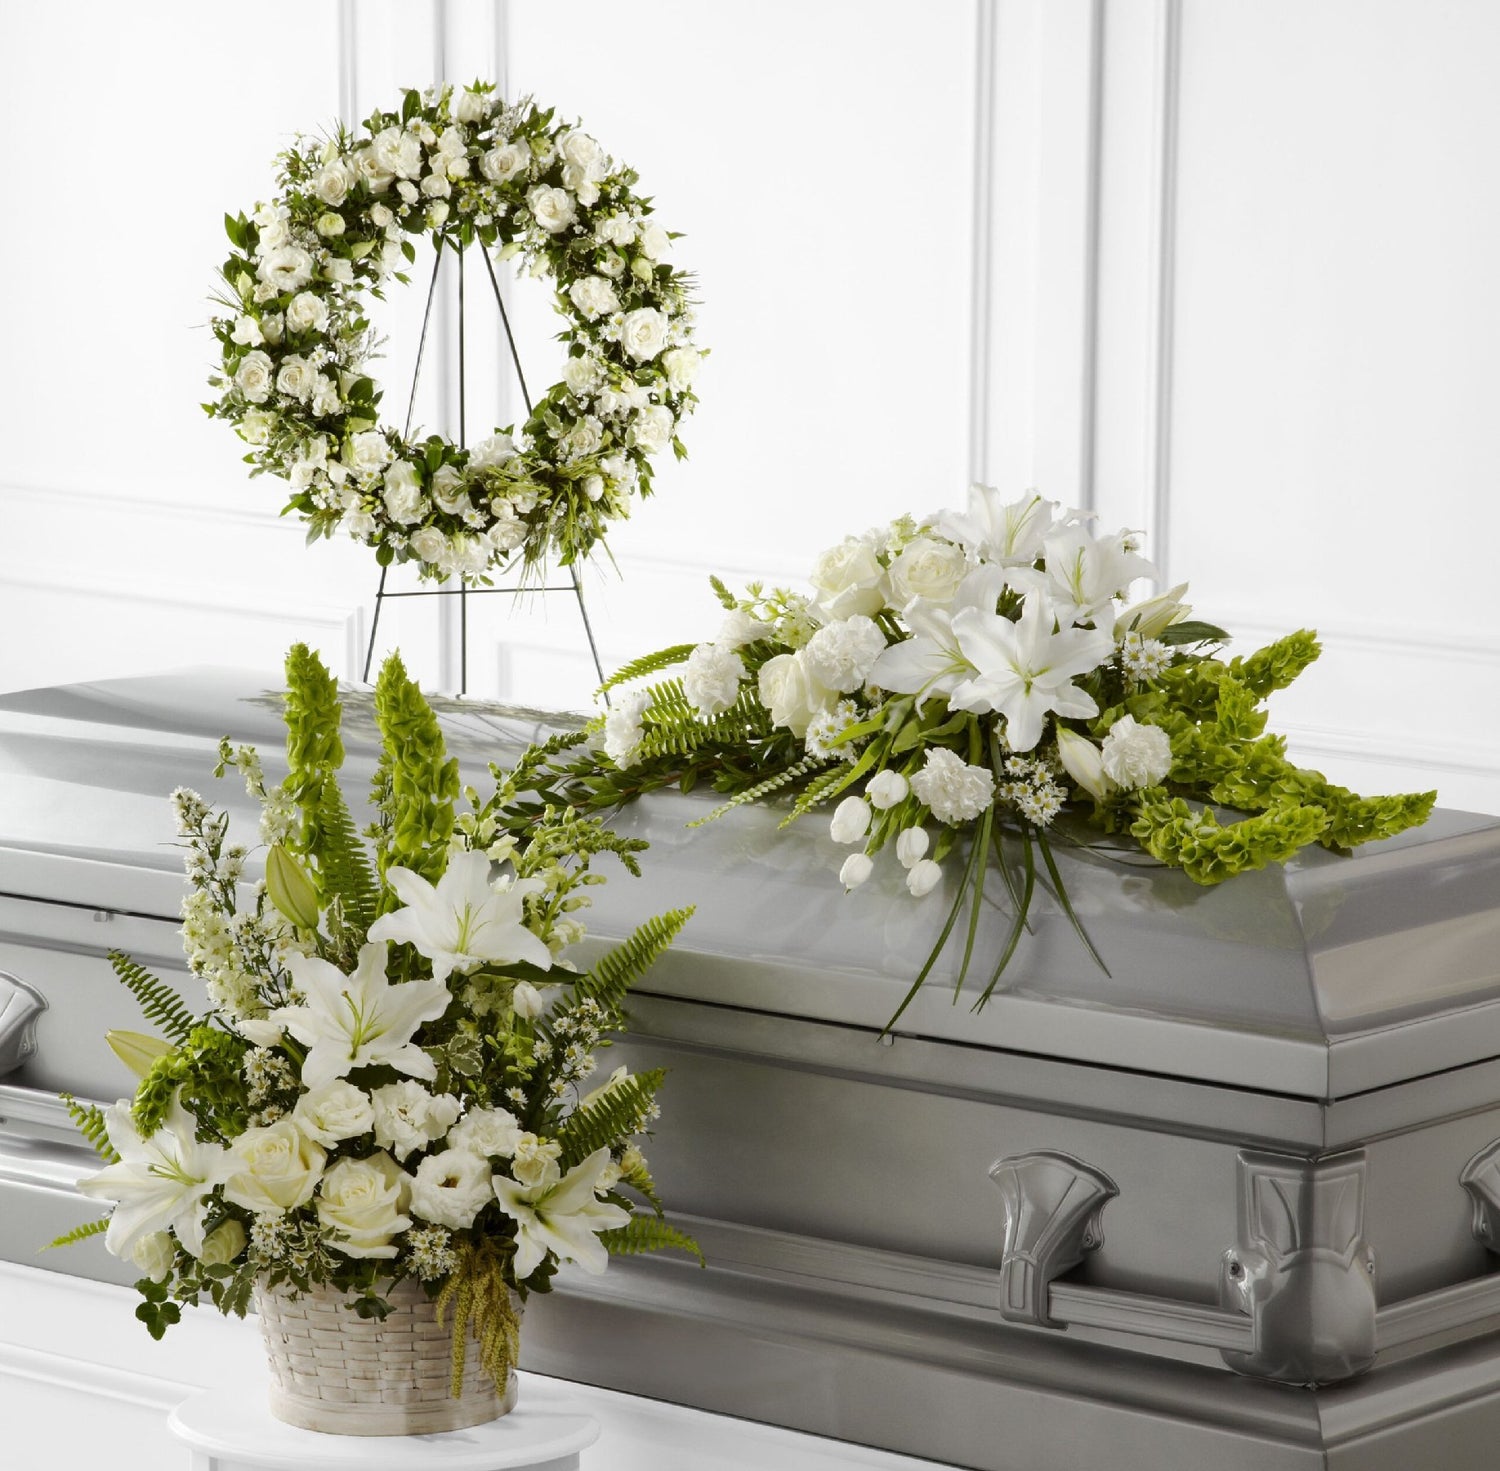 Funeral Floral Cross - Flower Delivery NYC